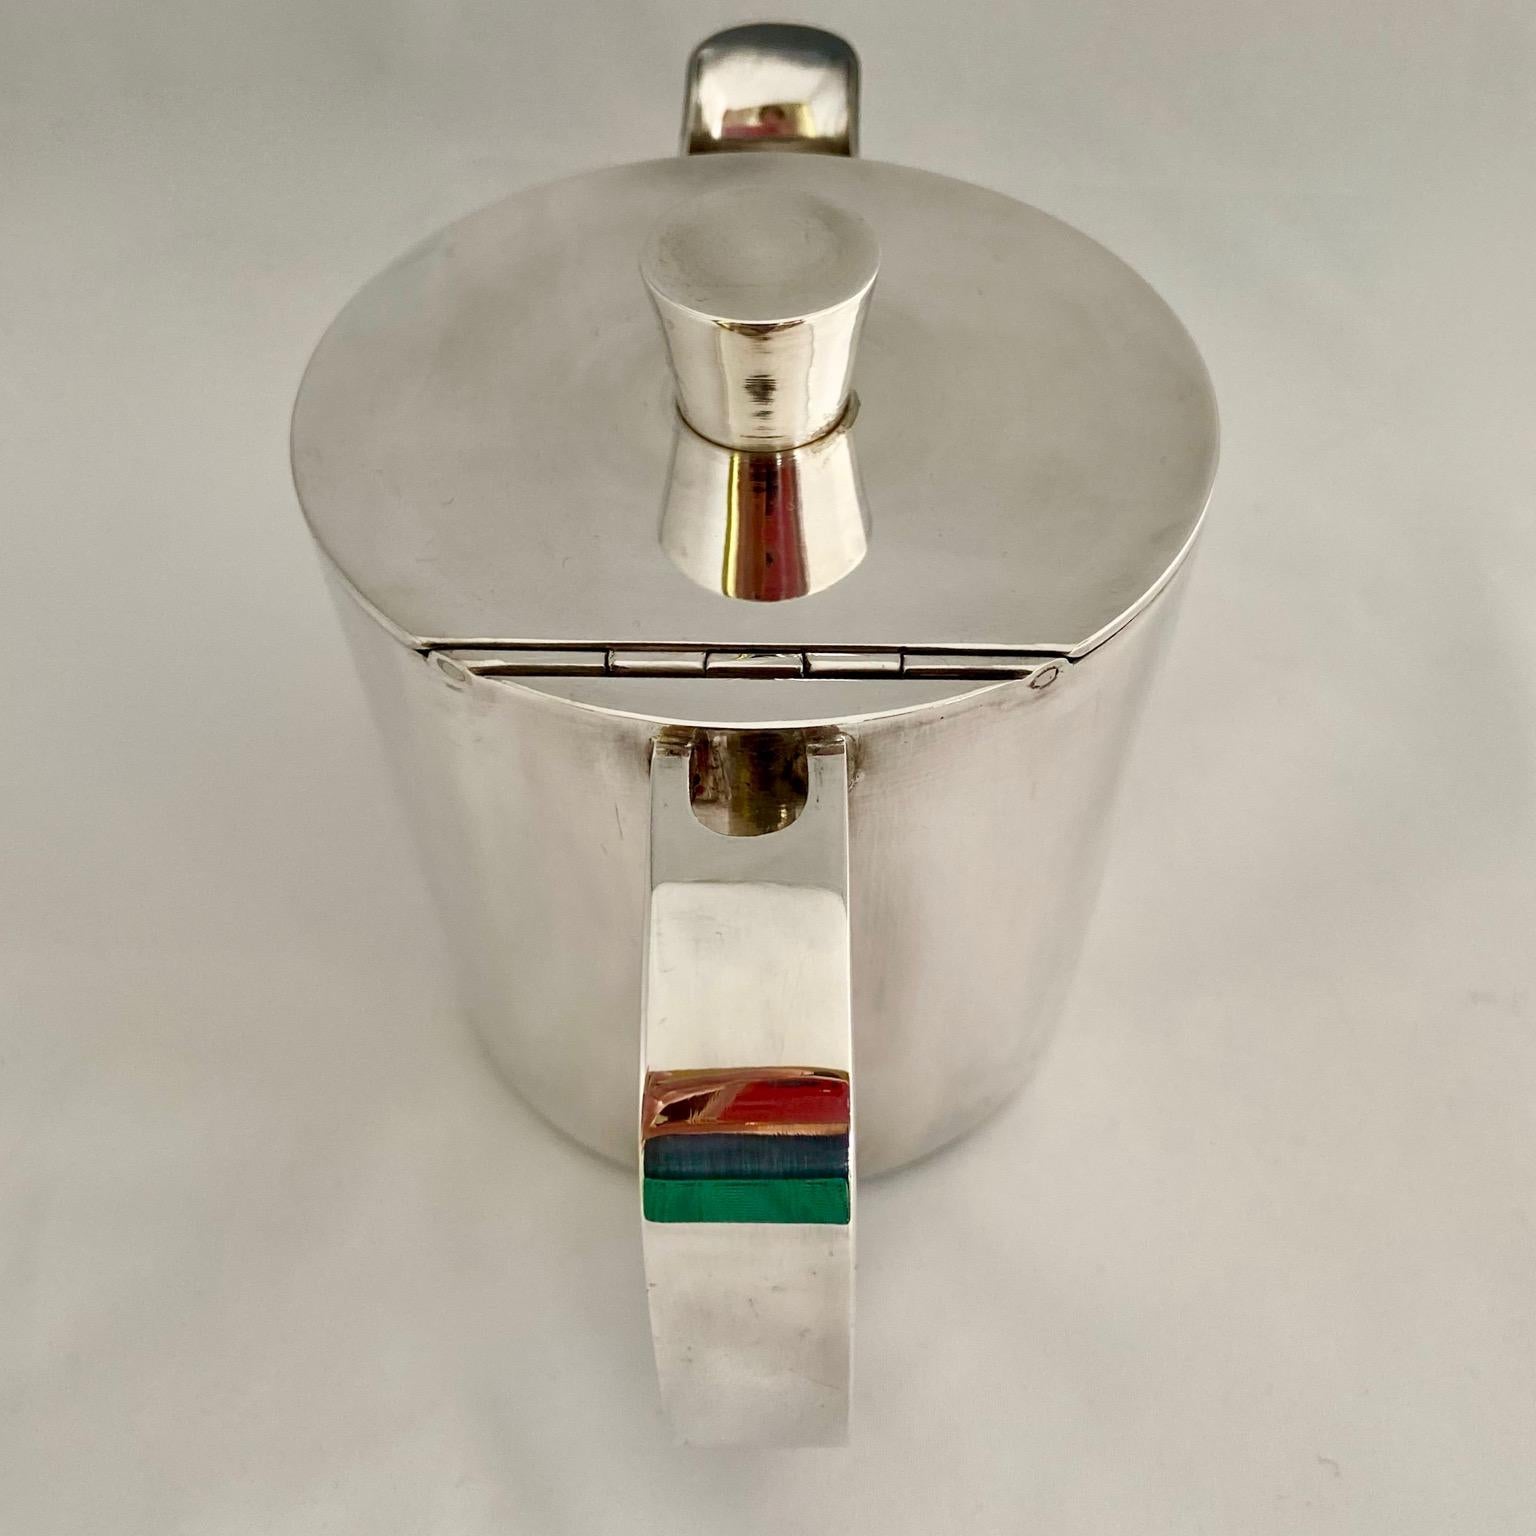 Gio Ponti silver plated metal coffee pot (53cl) for Krupp, 1930s-1950s.
This coffee pot is from the Abner Hotel but seems to never have been used!
It would make a lovely present for someone who likes both design and coffee!